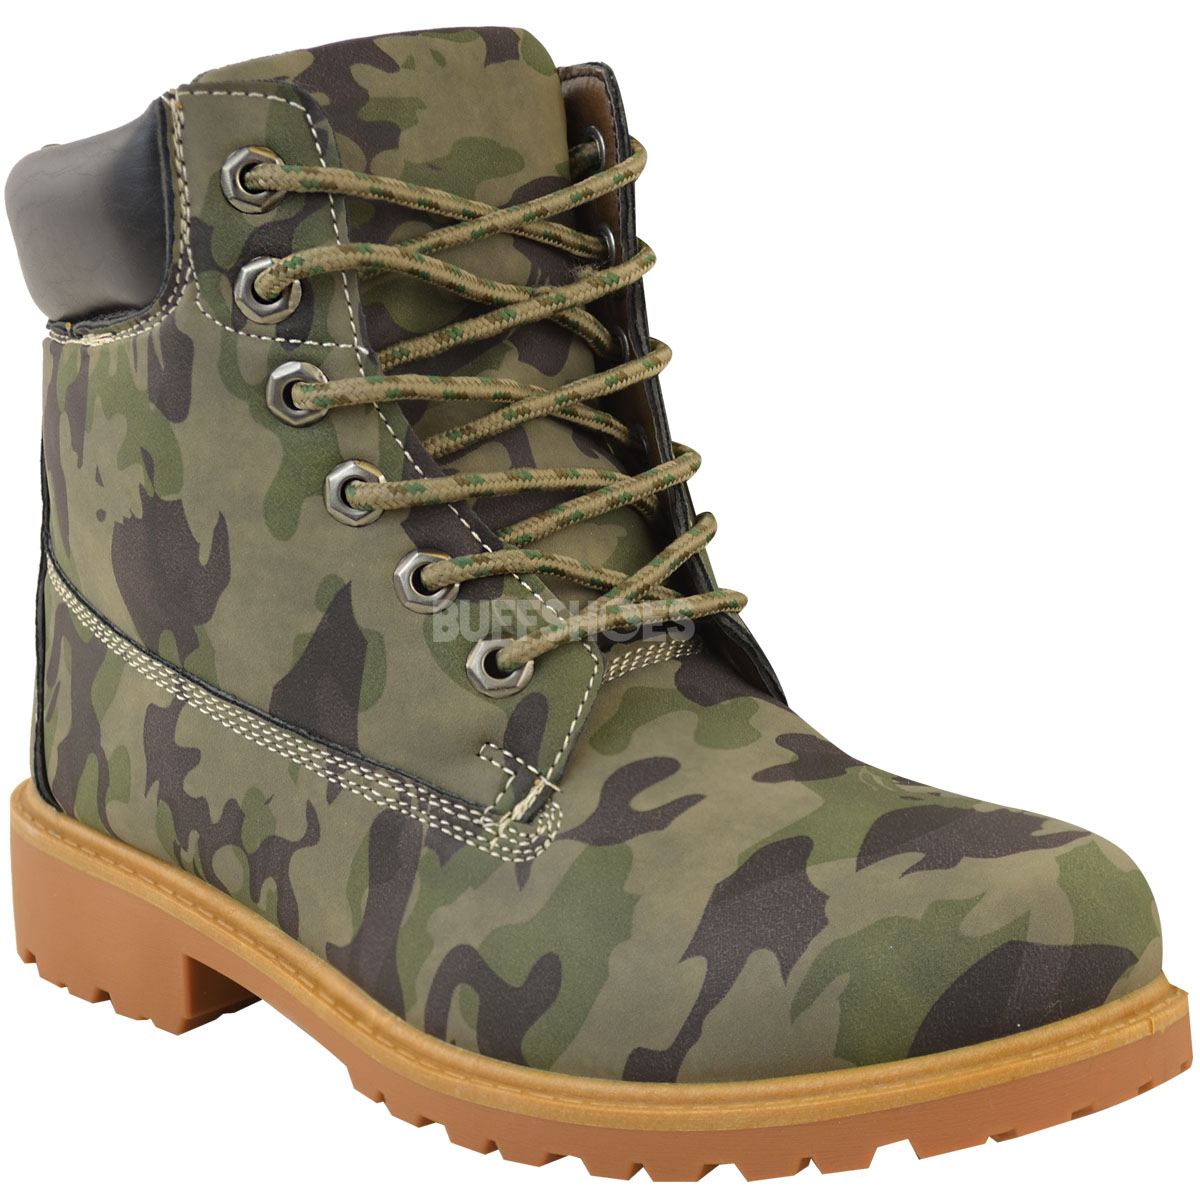 Womens Ladies Combat Army Boots Military Grip Hiking Walking Lace Up ...